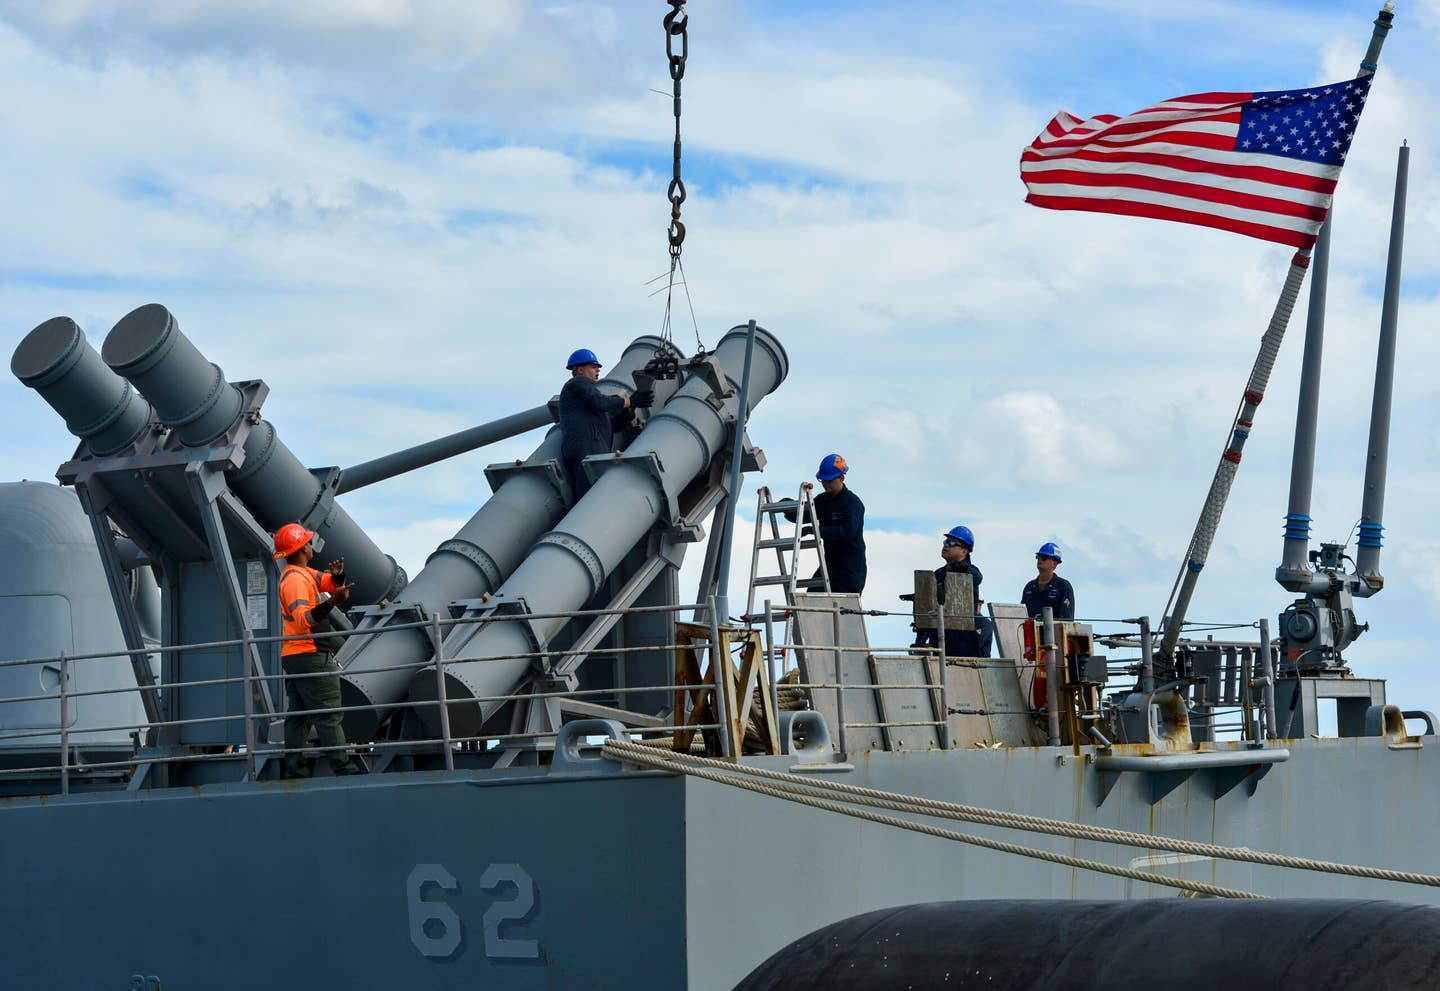 Sailors assigned to the <em>Ticonderoga</em> class guided-missile cruiser USS <em>Chancellorsville</em> (CG-62) install a Mk 141 Harpoon missile launcher during a weapons upload in support of Valiant Shield 2022. <em>U.S. Navy photo by Hospital Corpsman 2nd Class Jan Jason Flores</em>